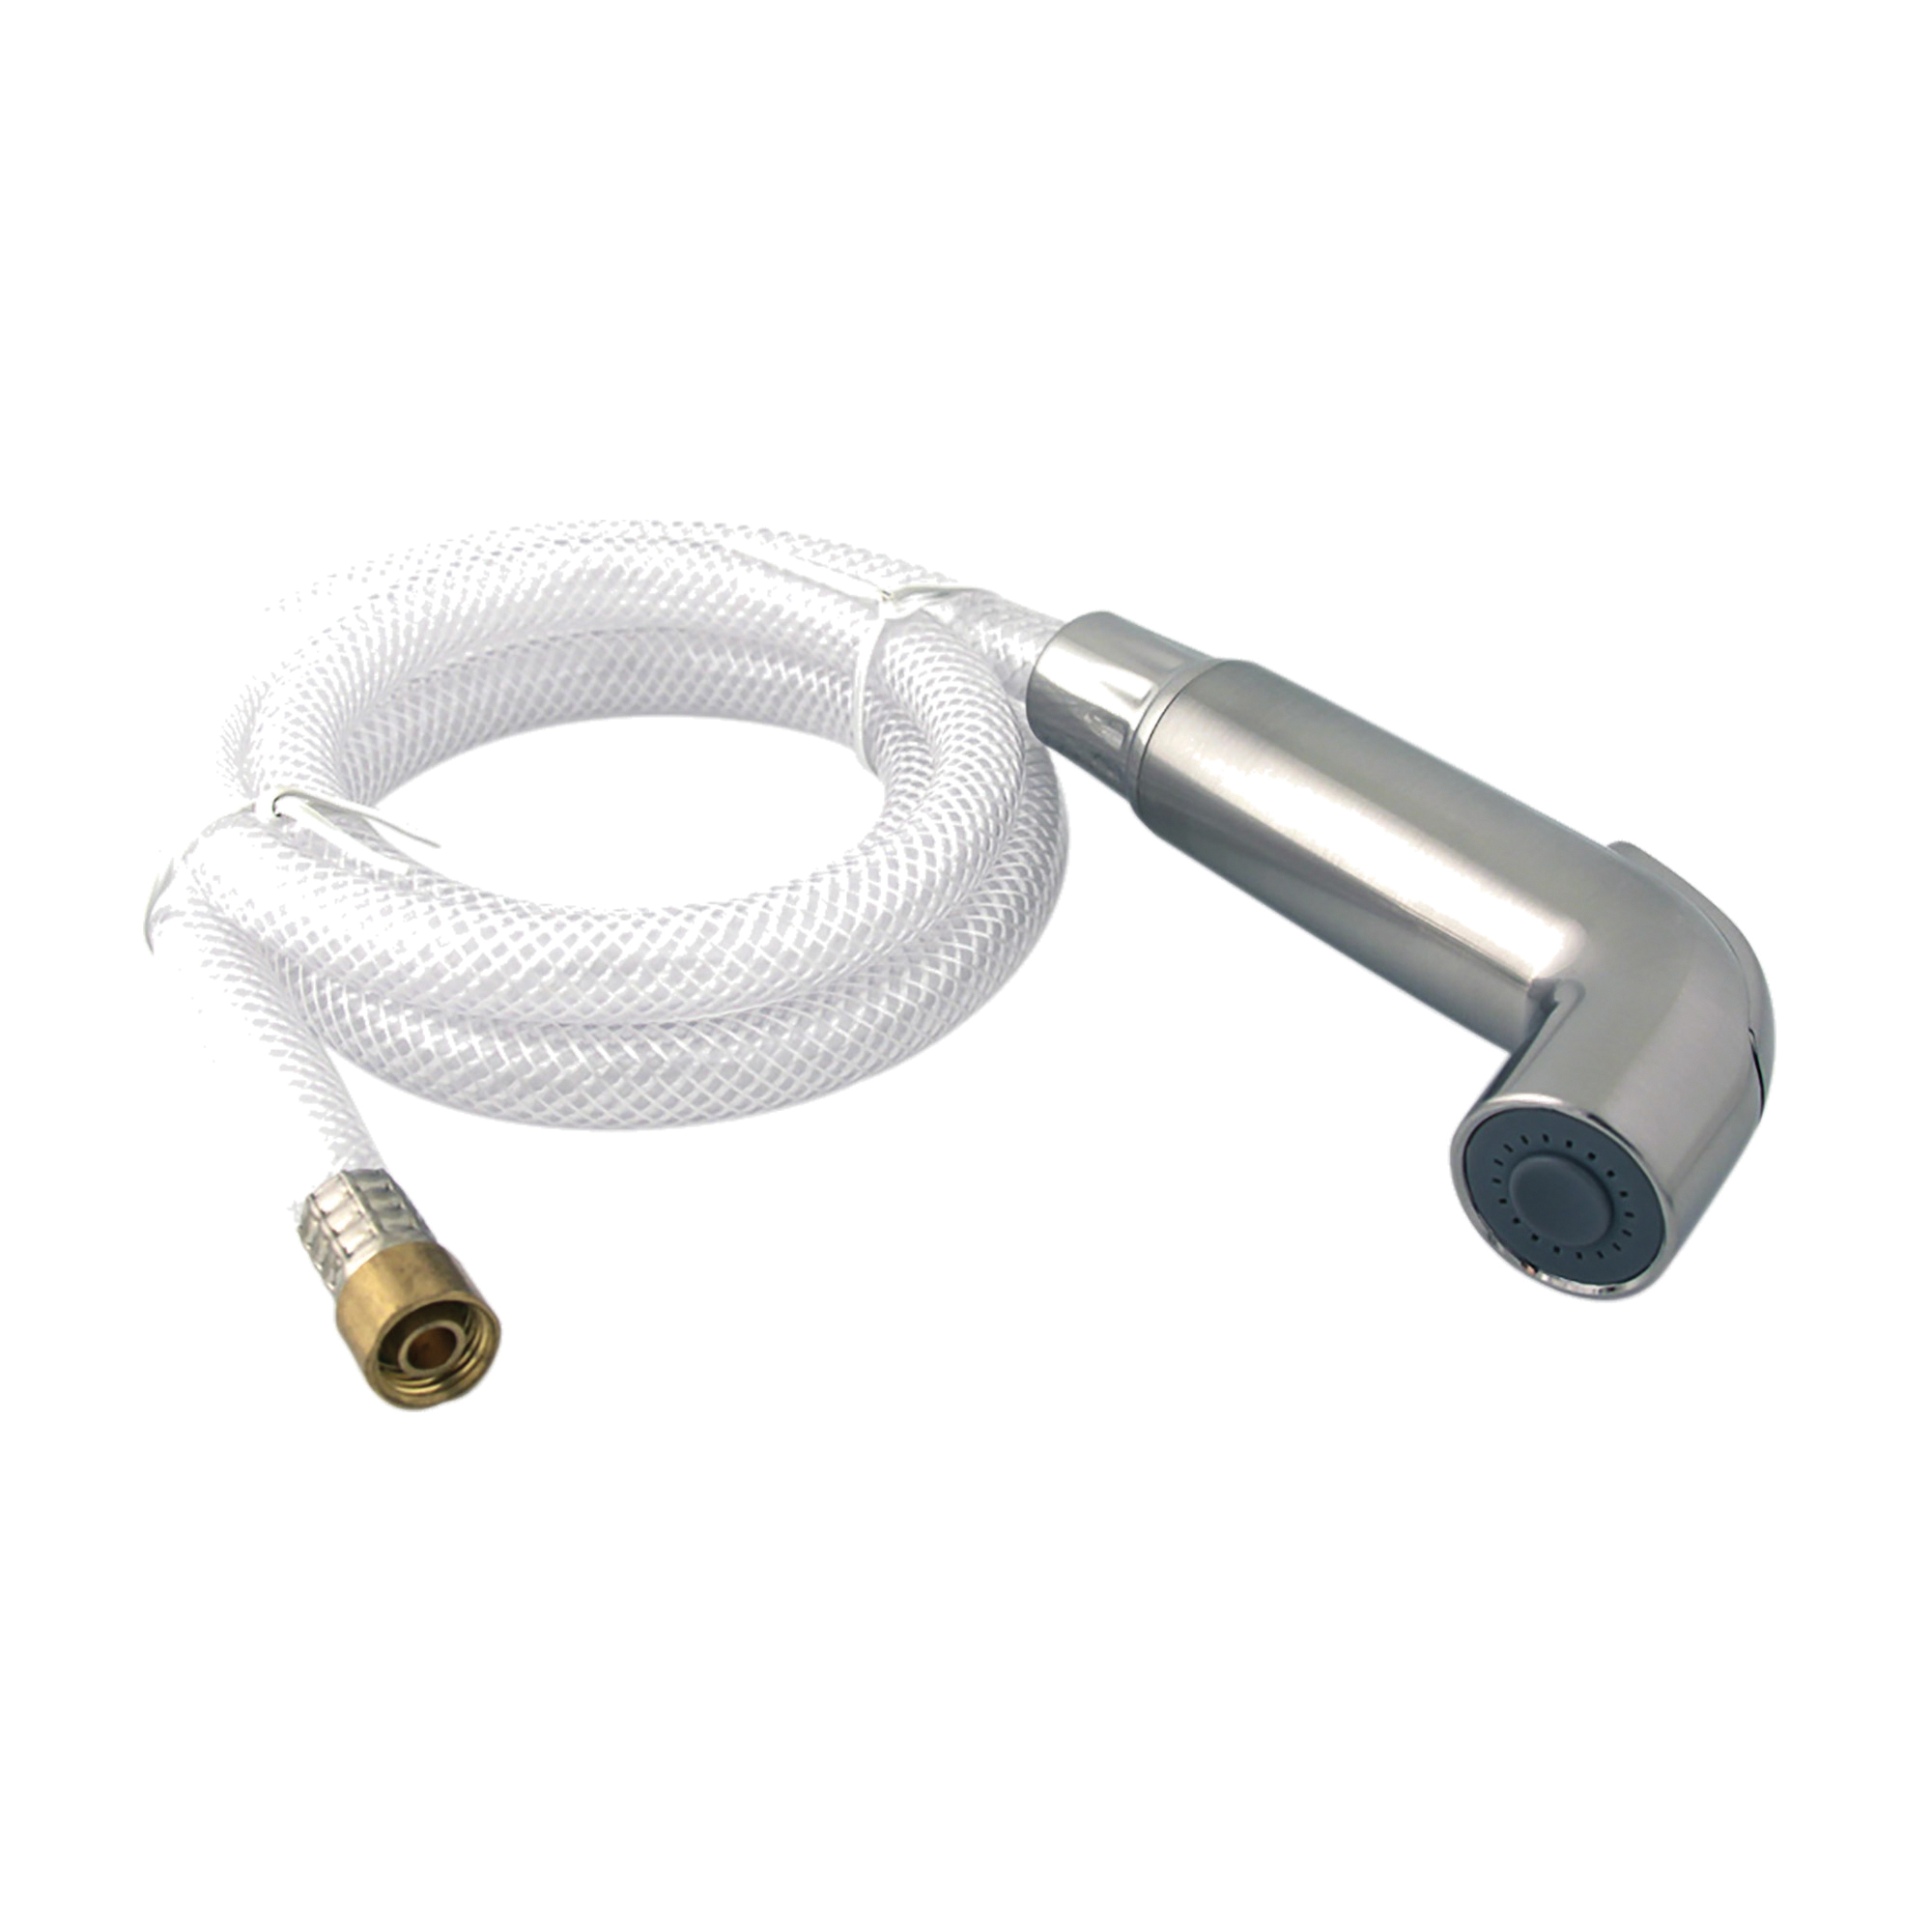 American Standard PROSITE M953678-0750A Hand Spray and Hose, For Use With Arch™ Colony® Soft 4175.500/4175.501 Single Control Kitchen Faucet, Stainless Steel Spray Head, Import